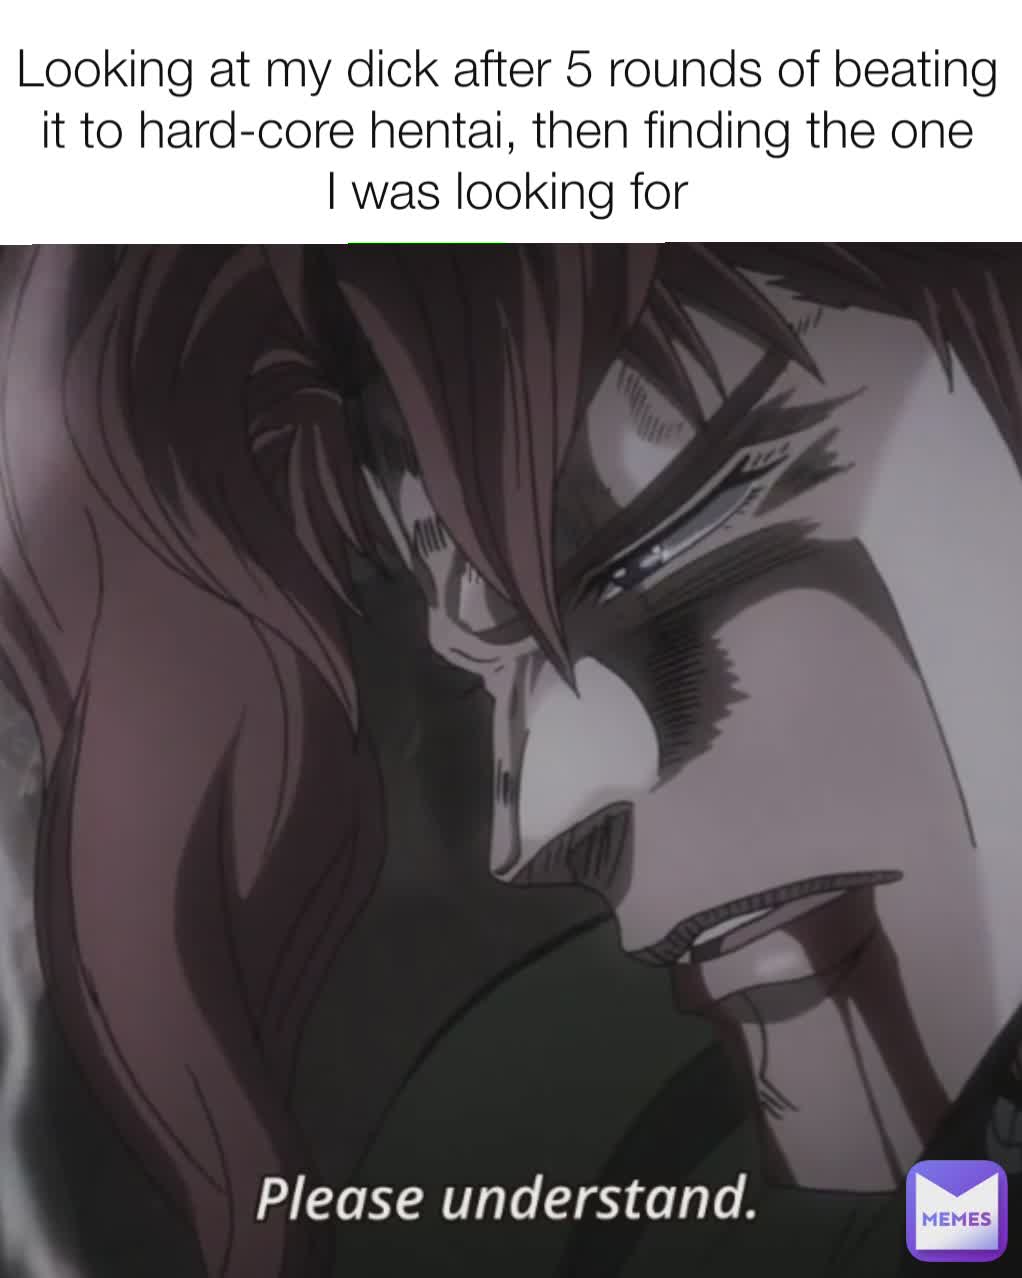 Looking at my dick after 5 rounds of beating it to hard-core hentai, then finding the one I was looking for